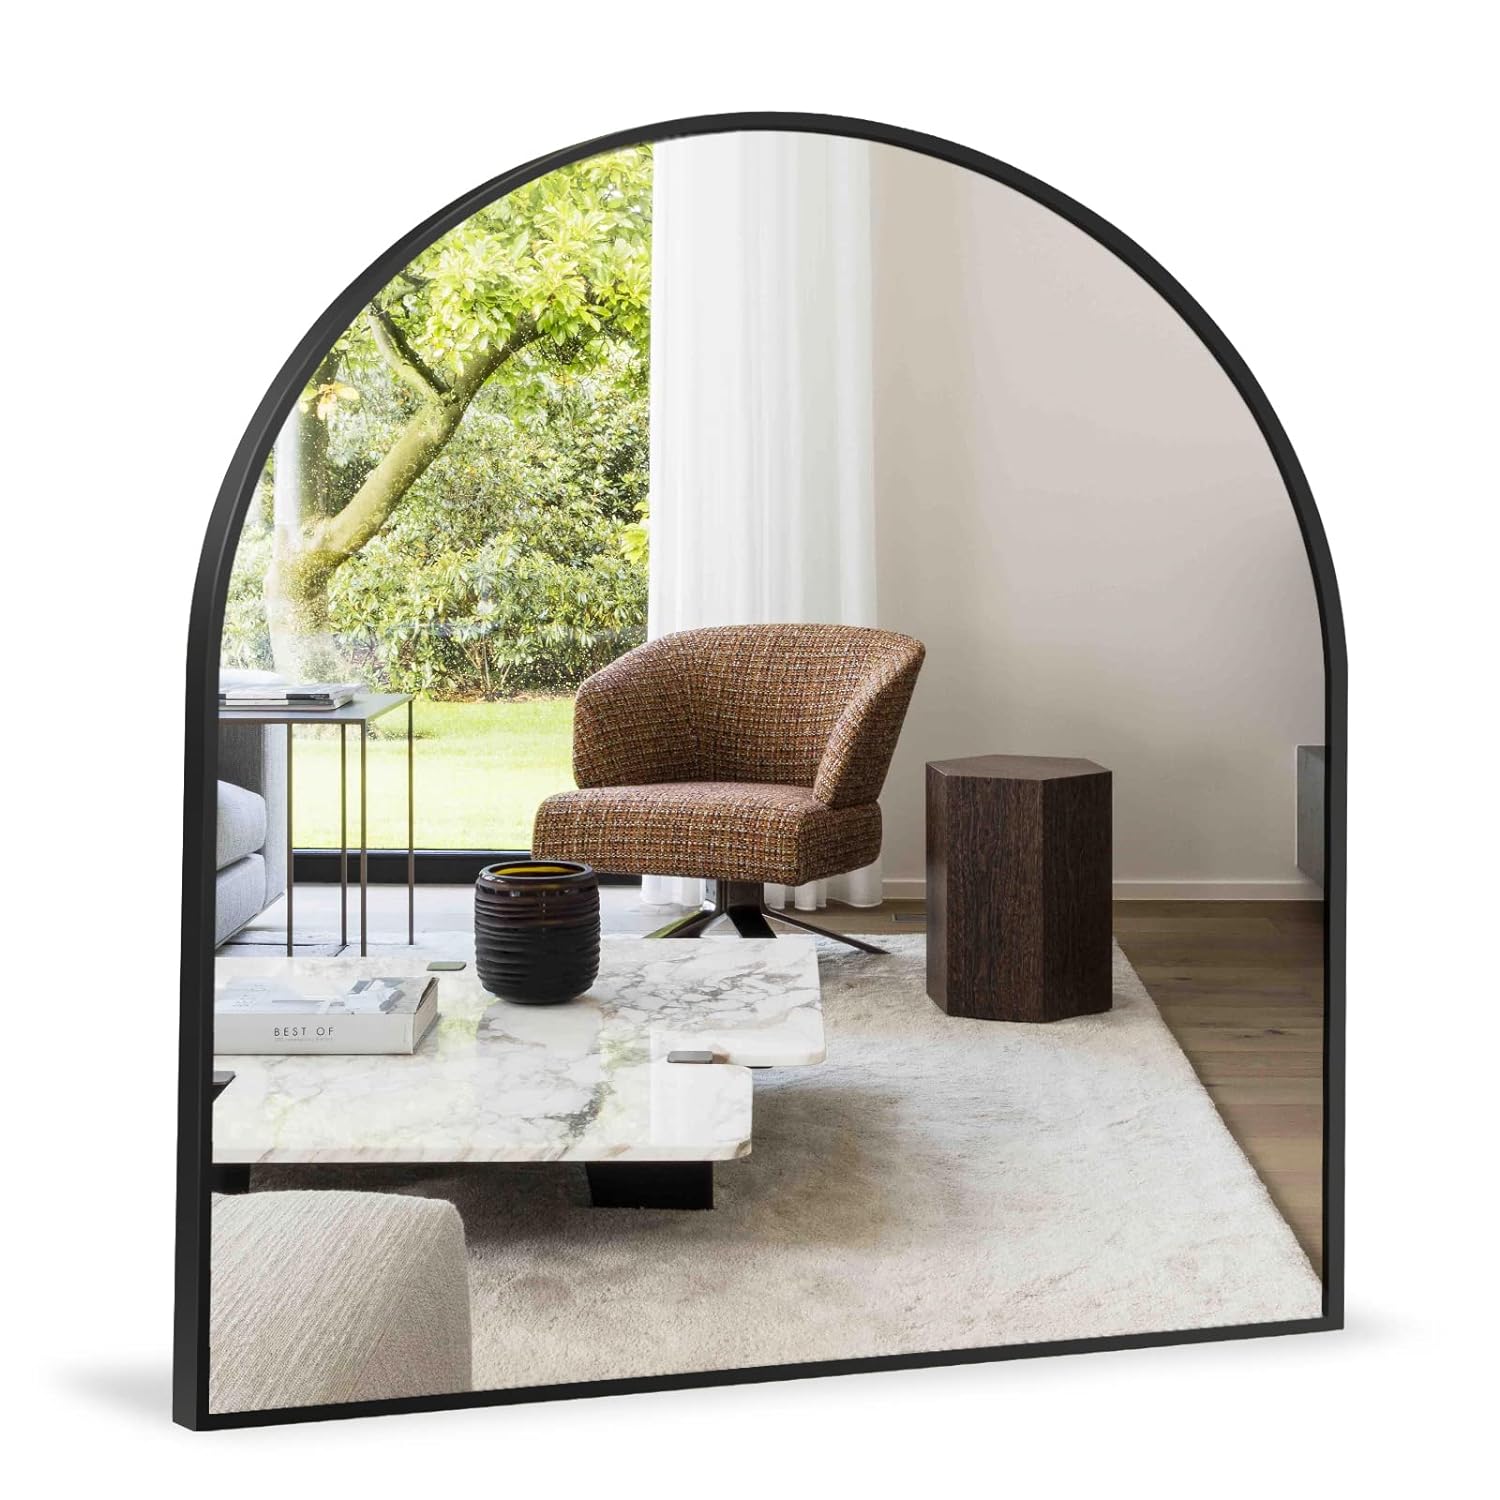 Great Choice Products Black Arched Mirror 24 X 26 Inch, Arched Wall Mirror With Metal Frame For Bathroom Living Room Entryway Bedroom Wall Decor